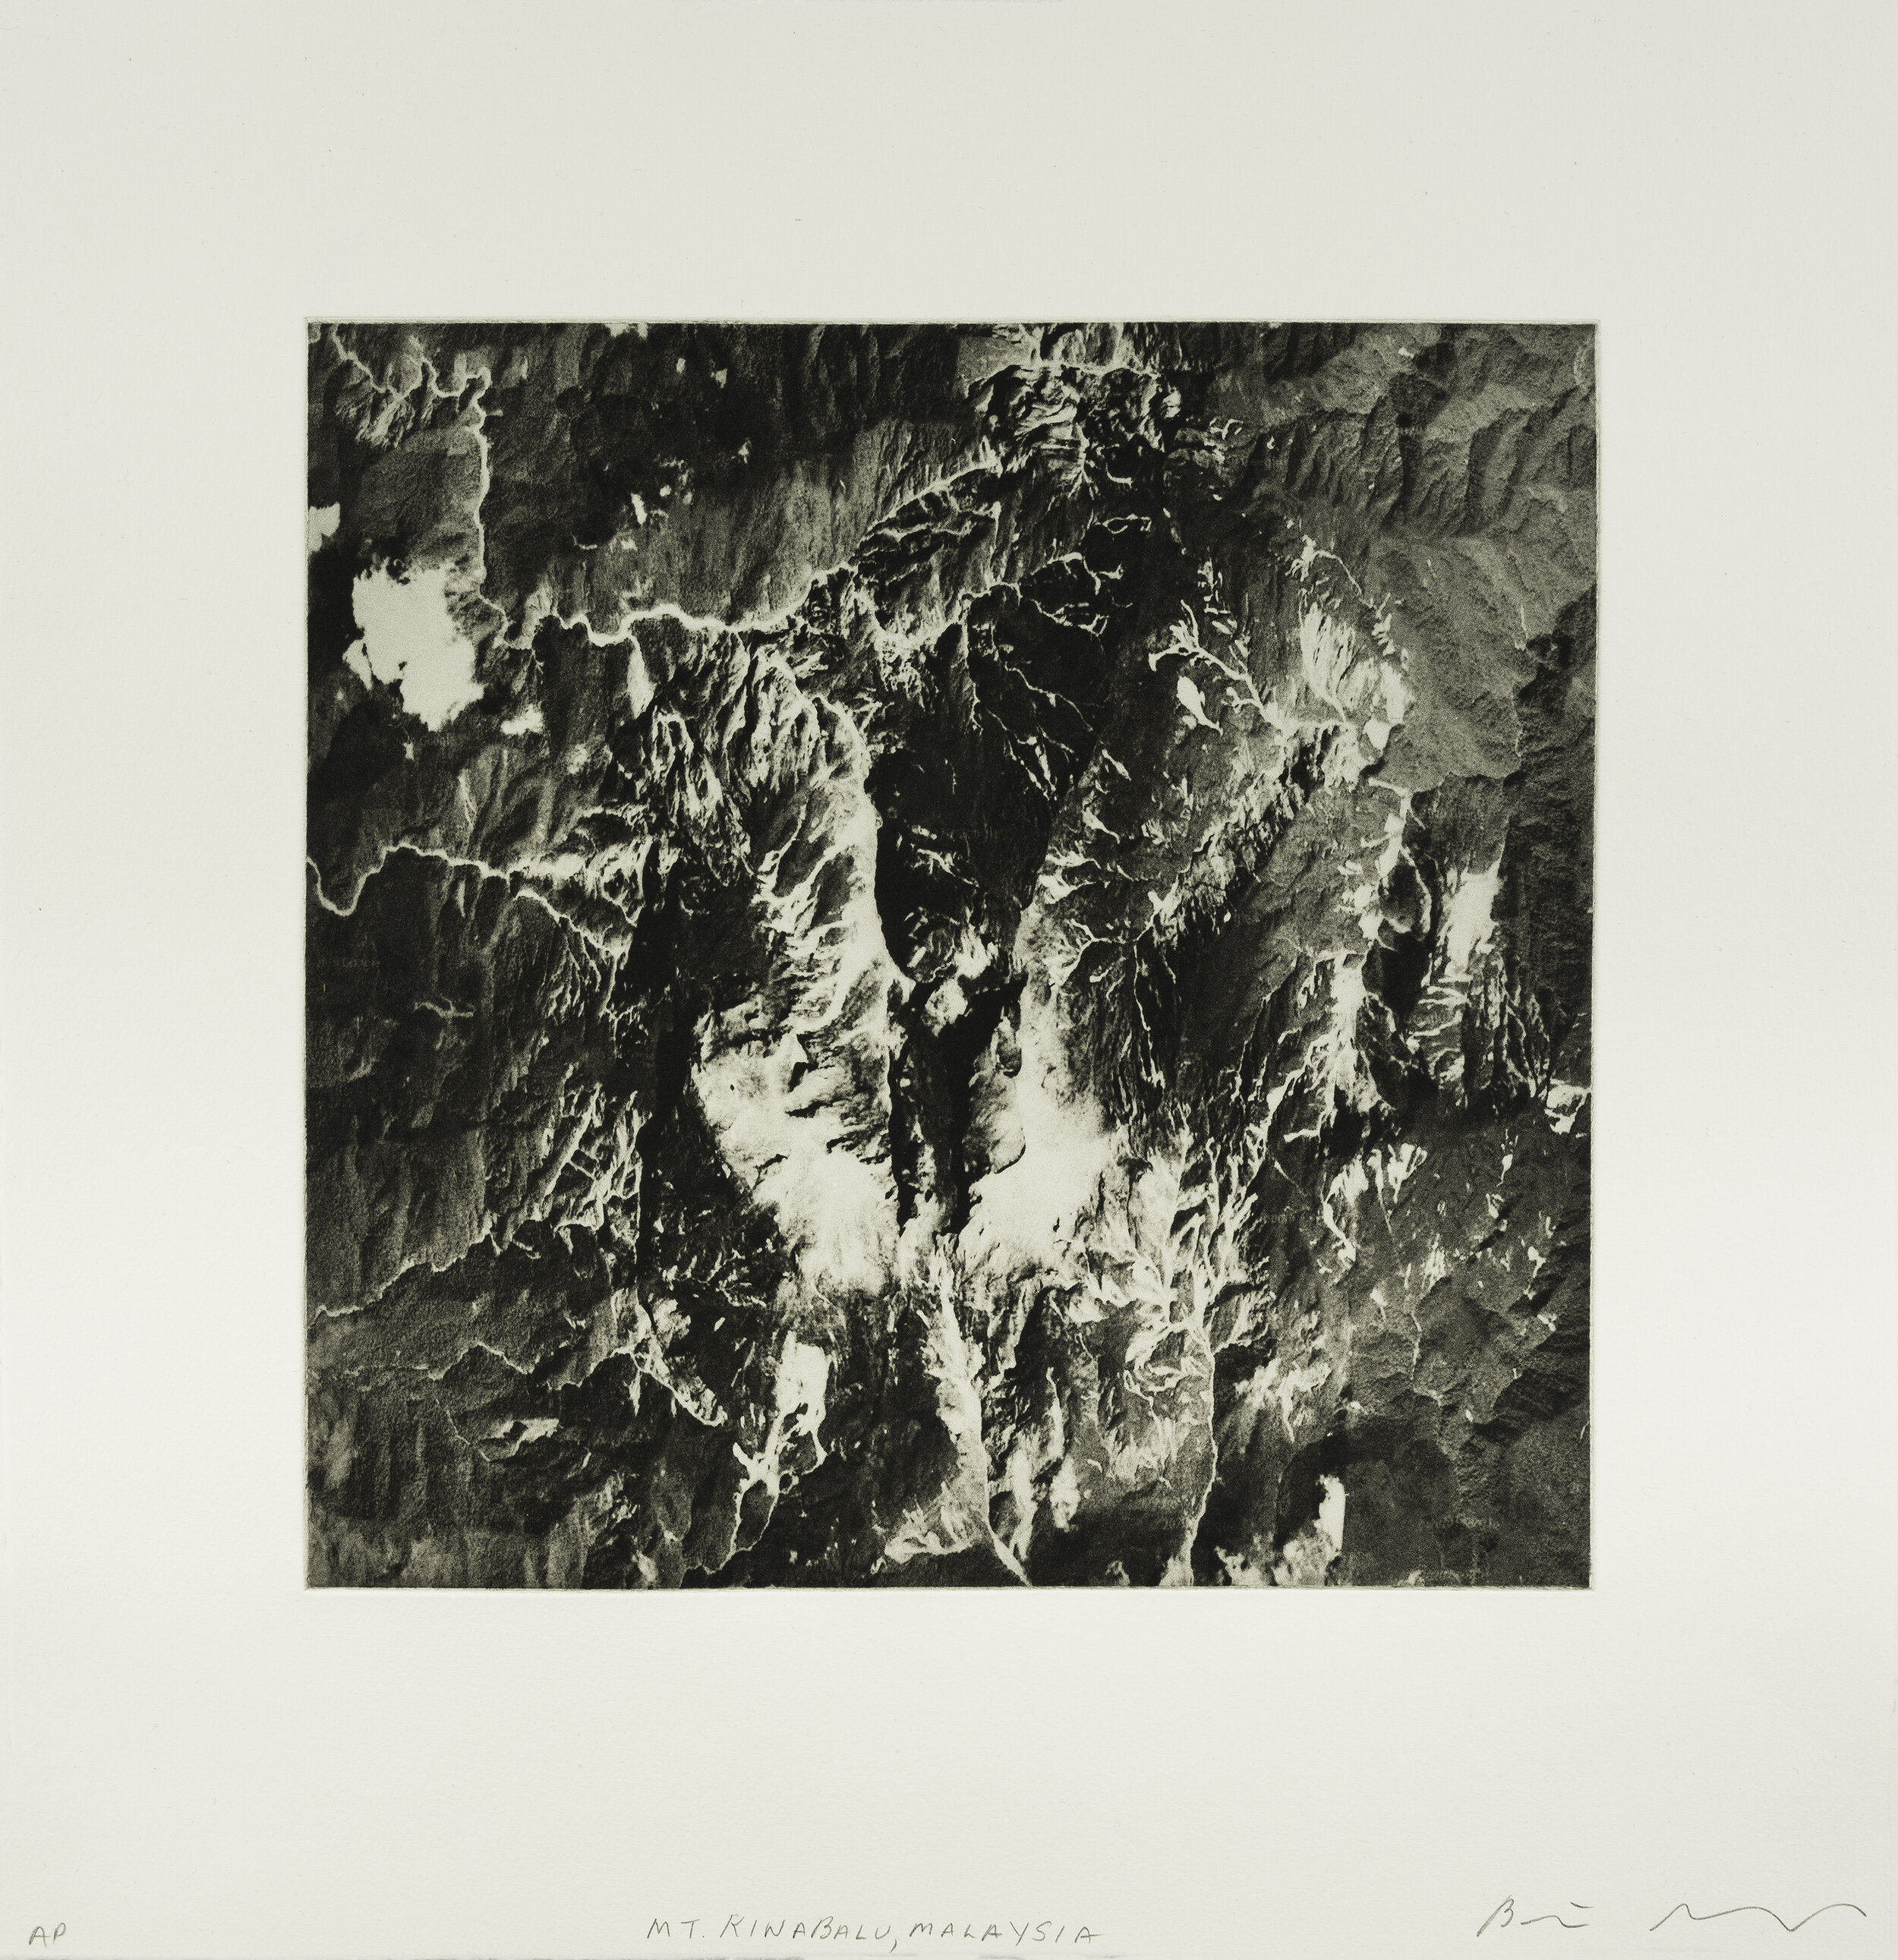    Kinabalu, Malaysia, 2020     Copperplate photogravure etching on cotton rag paper, plate size; 10.6 x 10.6, paper size; 16 x 15.5, edition 10  